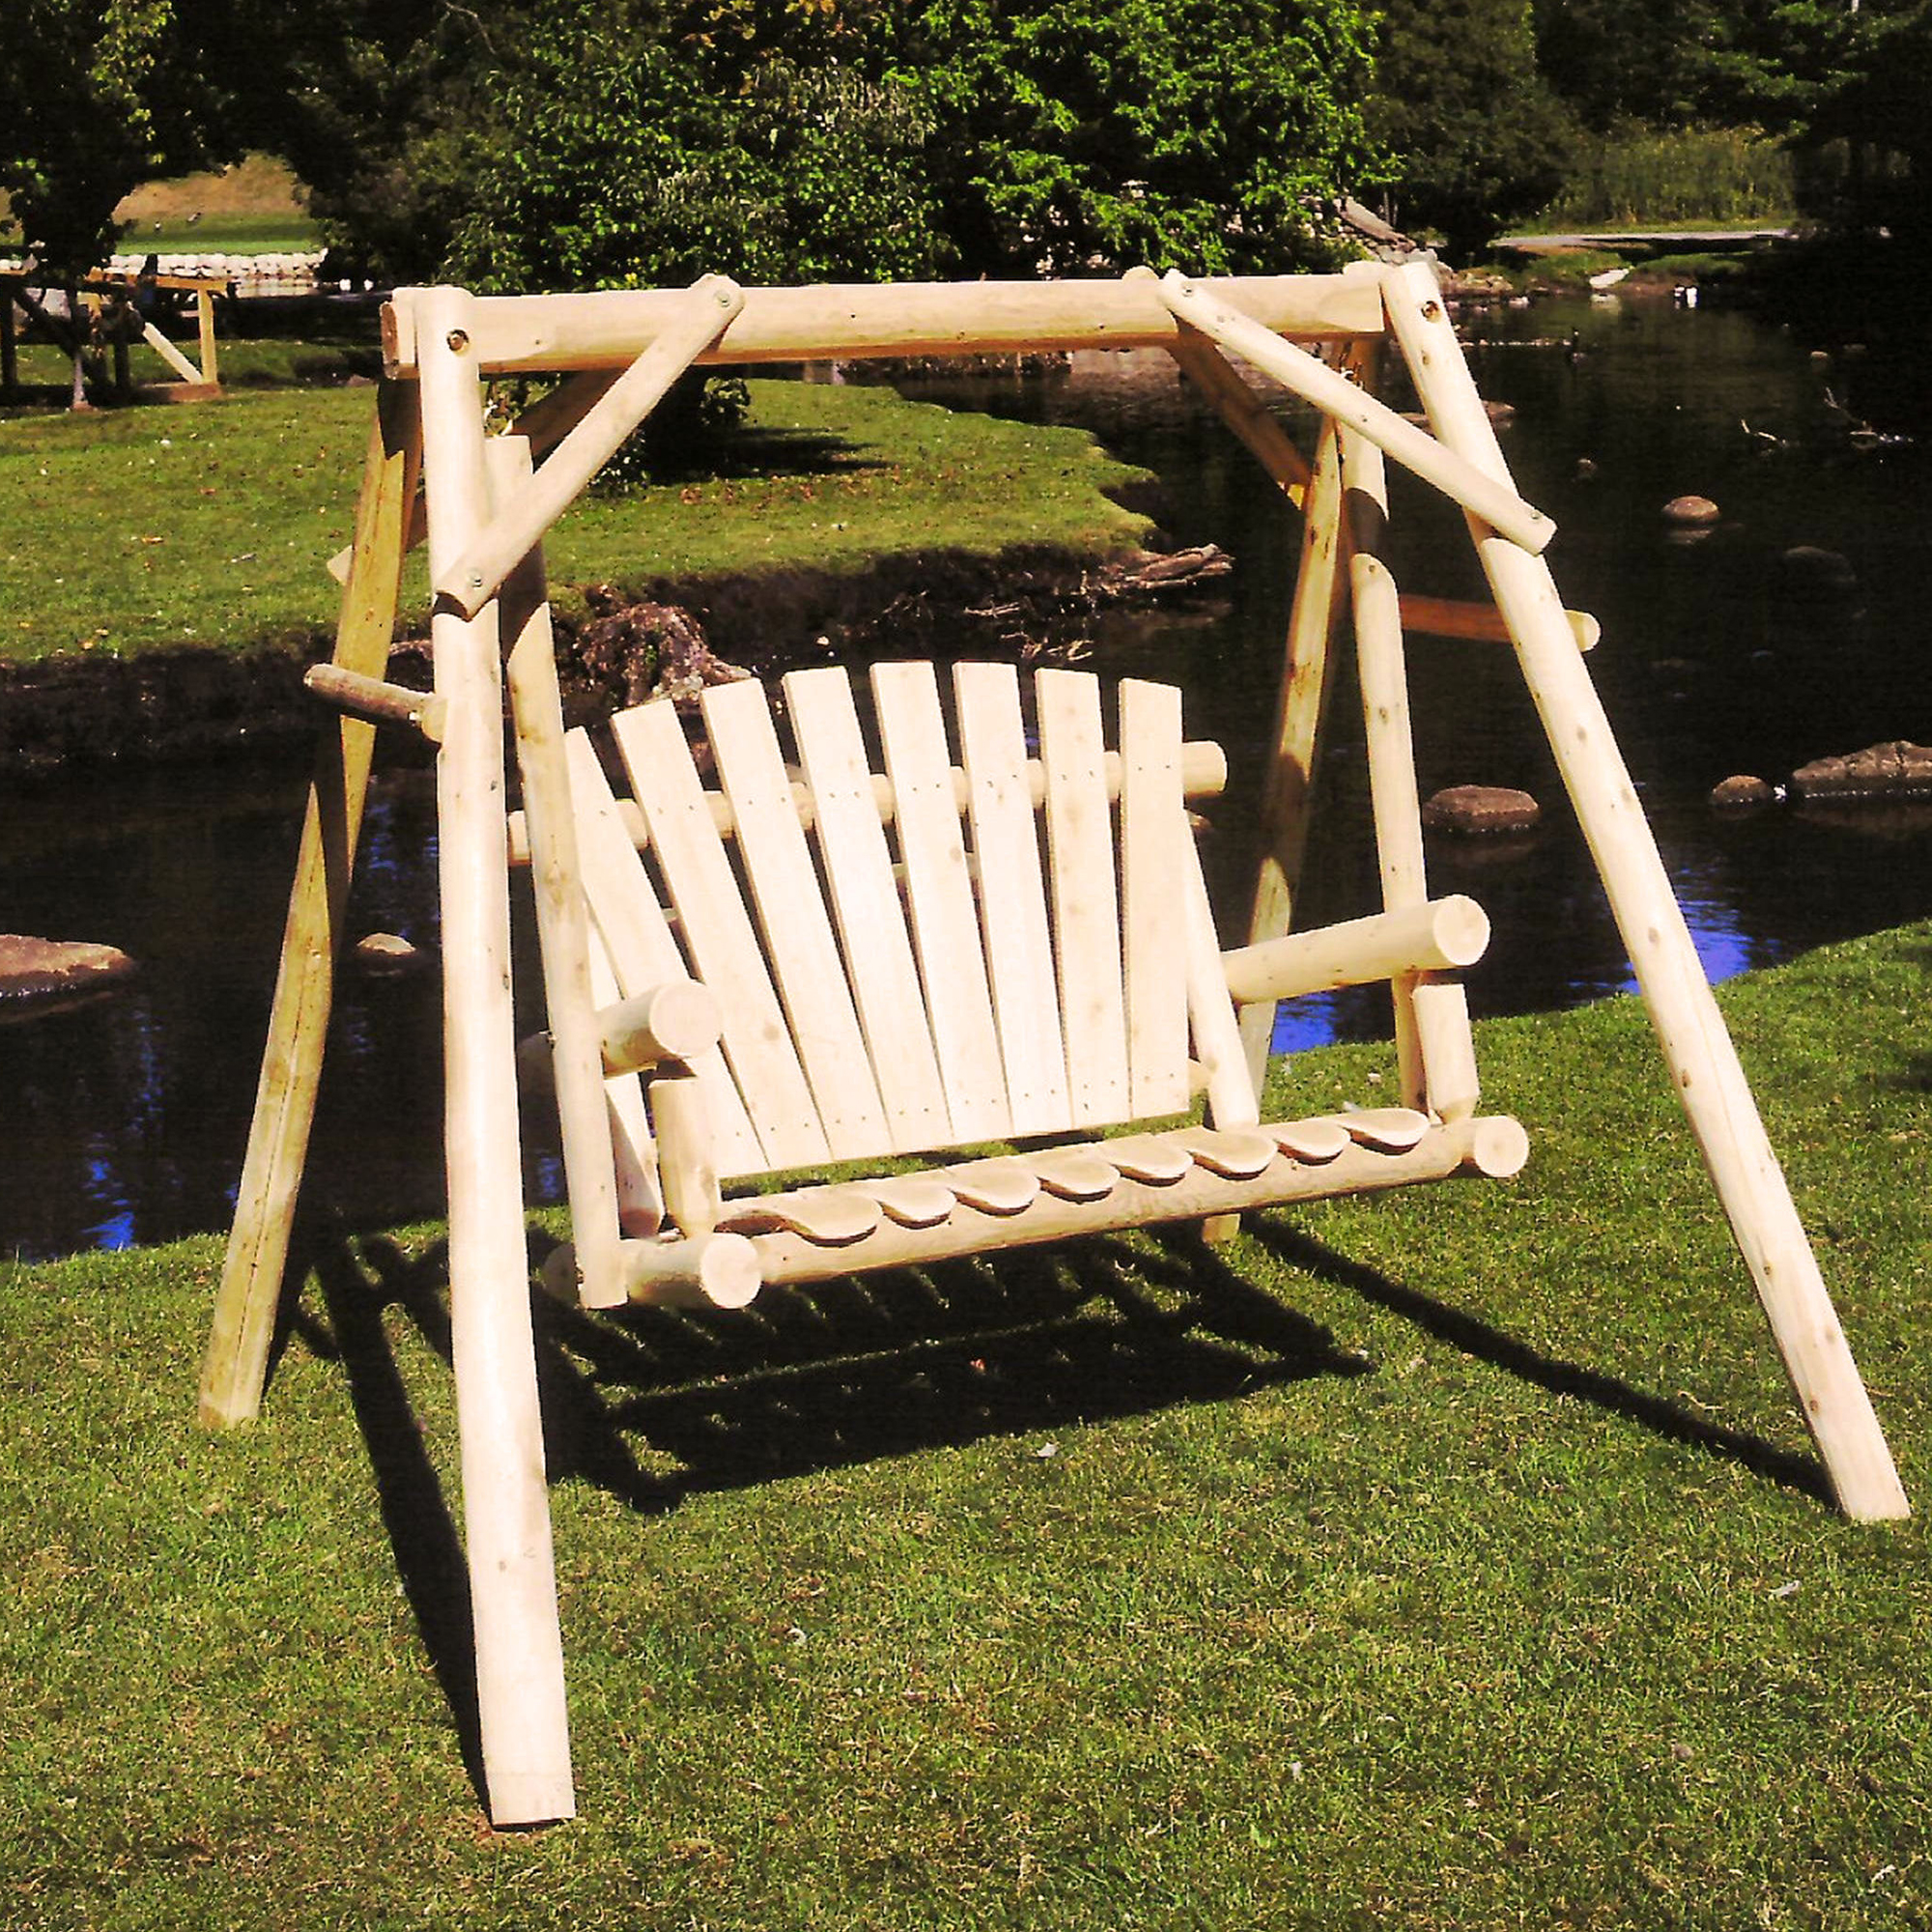 Lakeland Mills 5 Foot Cedar Log A Frame Outdoor Porch Swing Mount Only, Natural - image 3 of 3